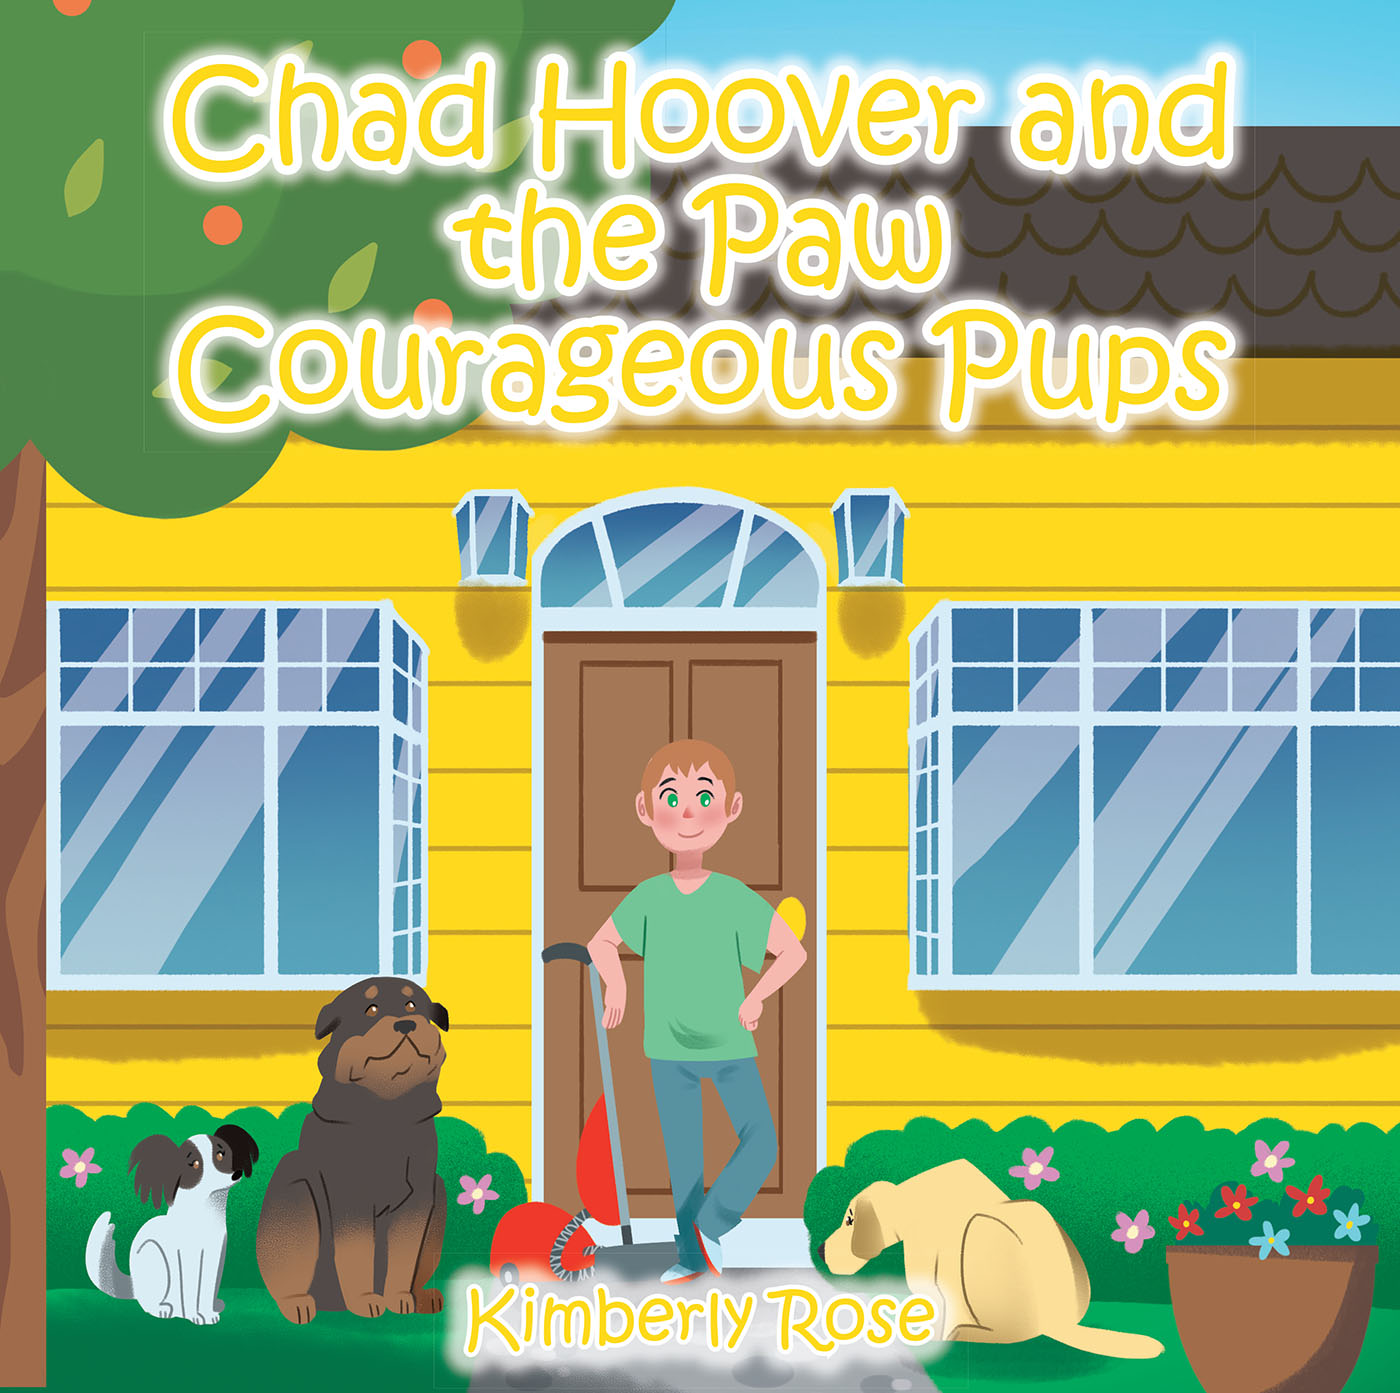 Kimberly Rose’s Newly Released "Chad Hoover and the Paw Courageous Pups" is an Entertaining Tale of Friendship and a Unique Fear